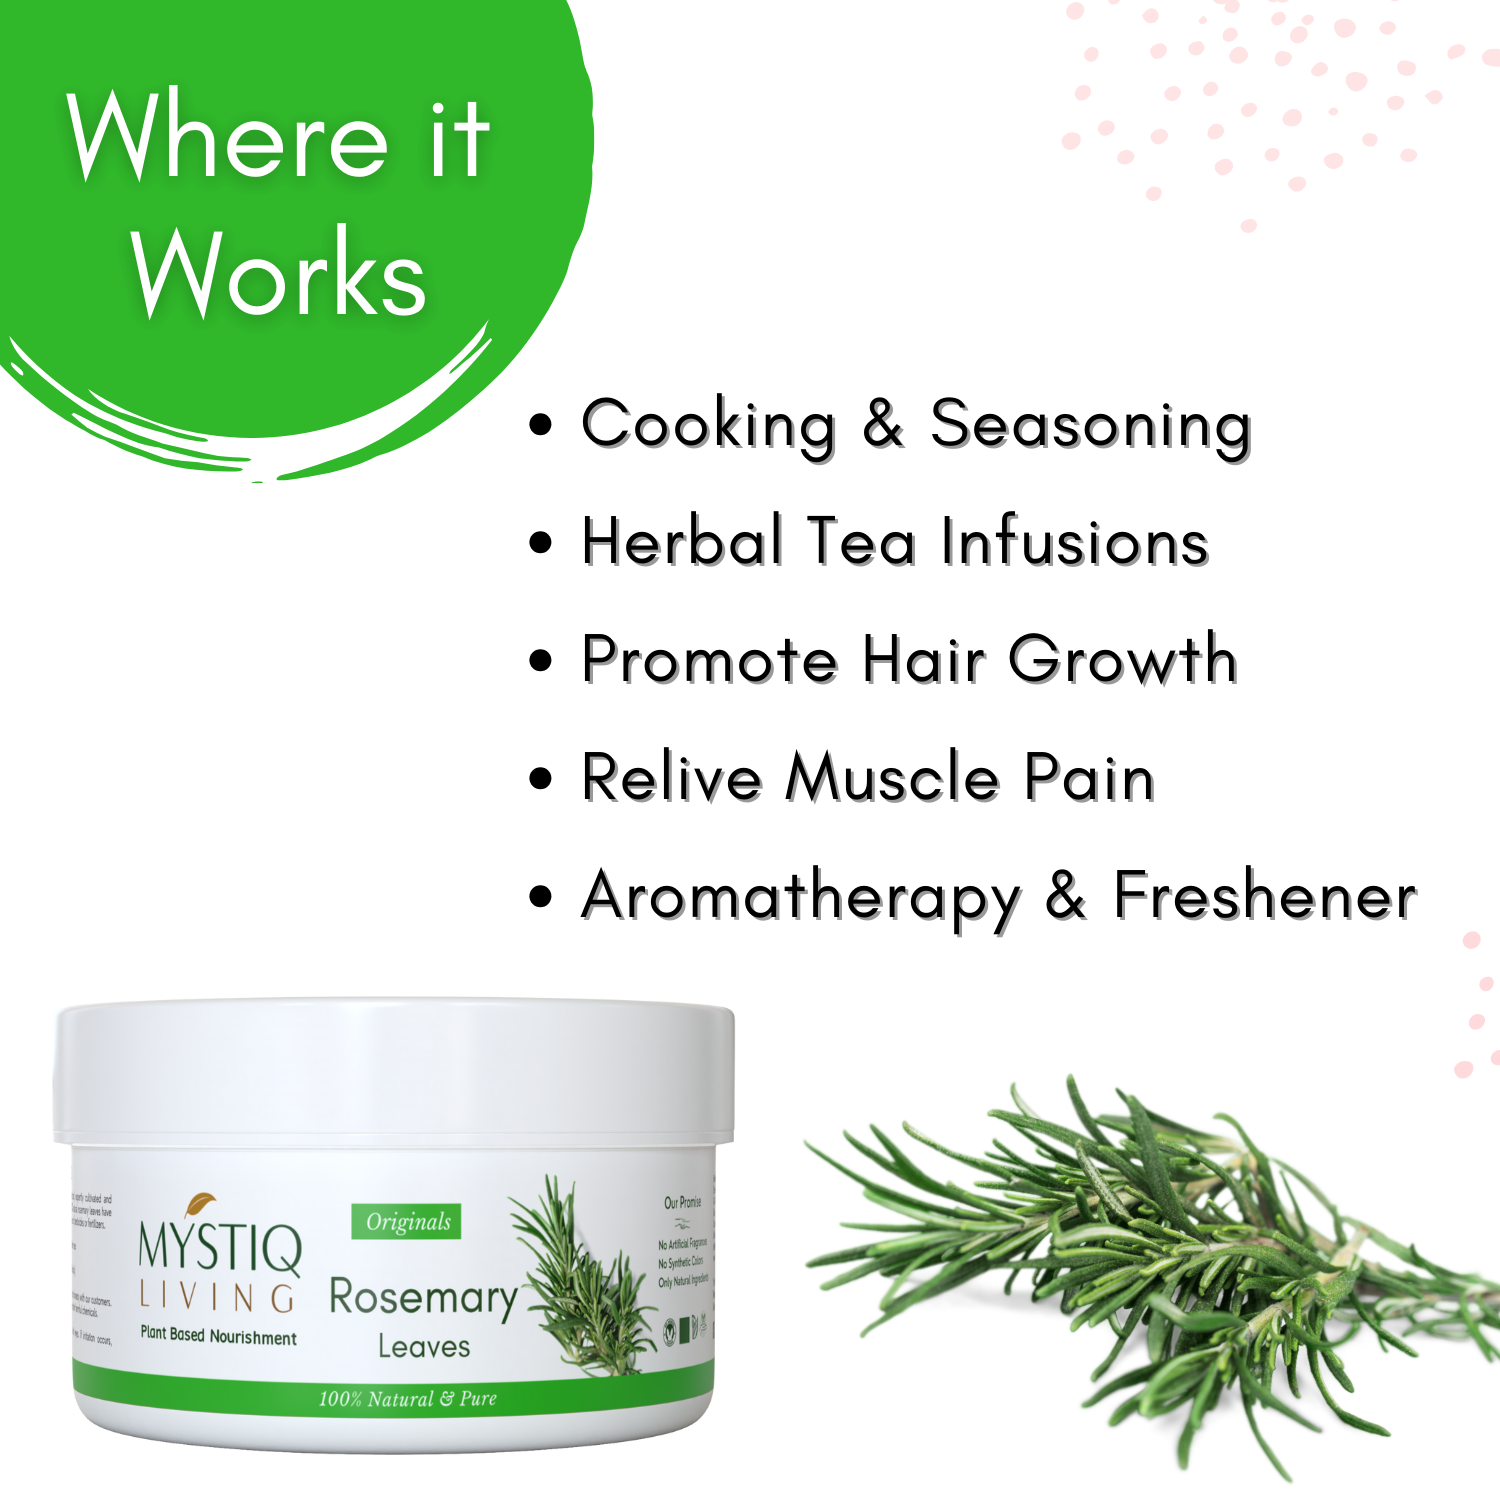 rosemary water spray and rosemary leaves for hair growth